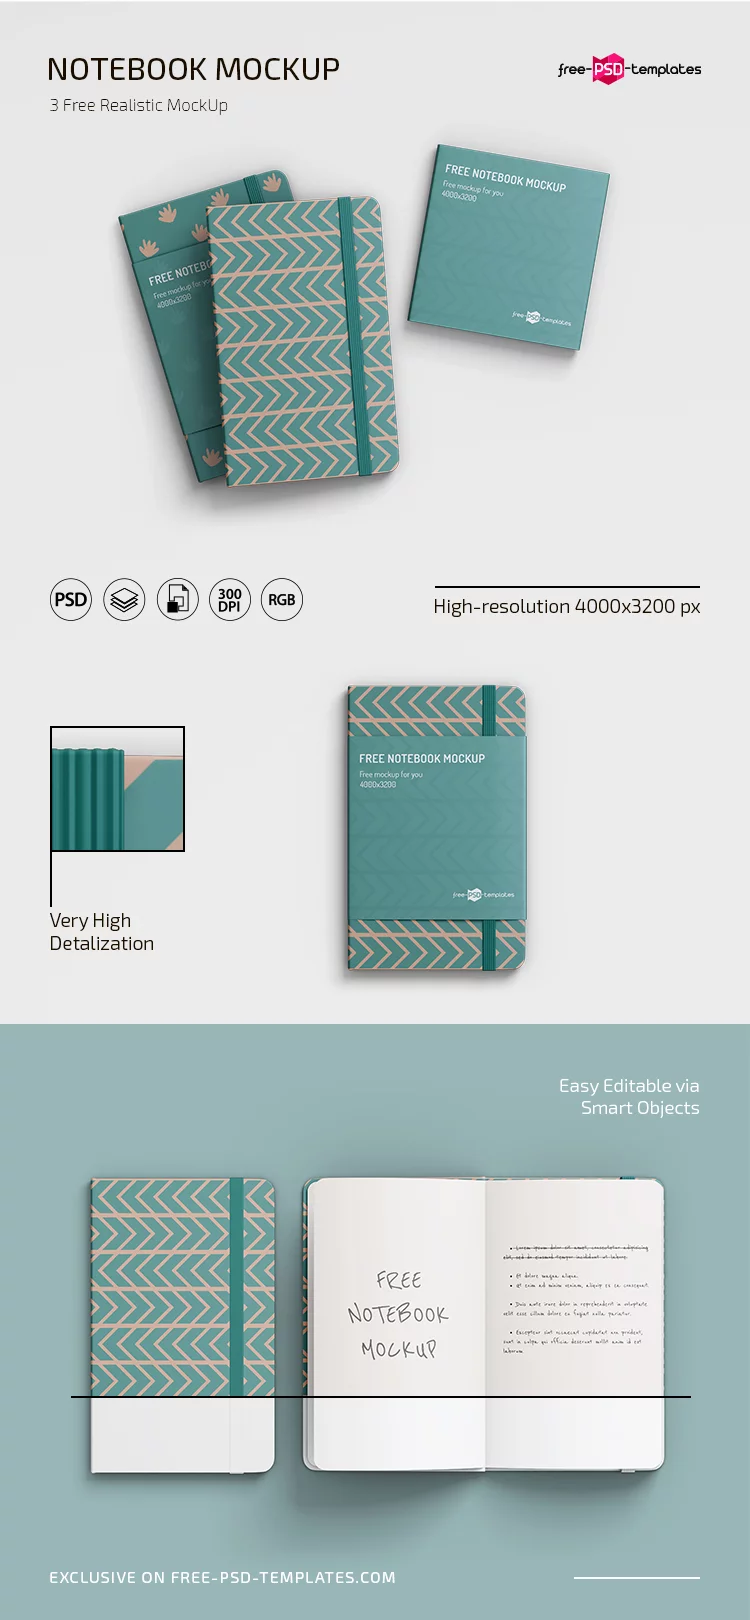 Free Notebook Mockup in PSD